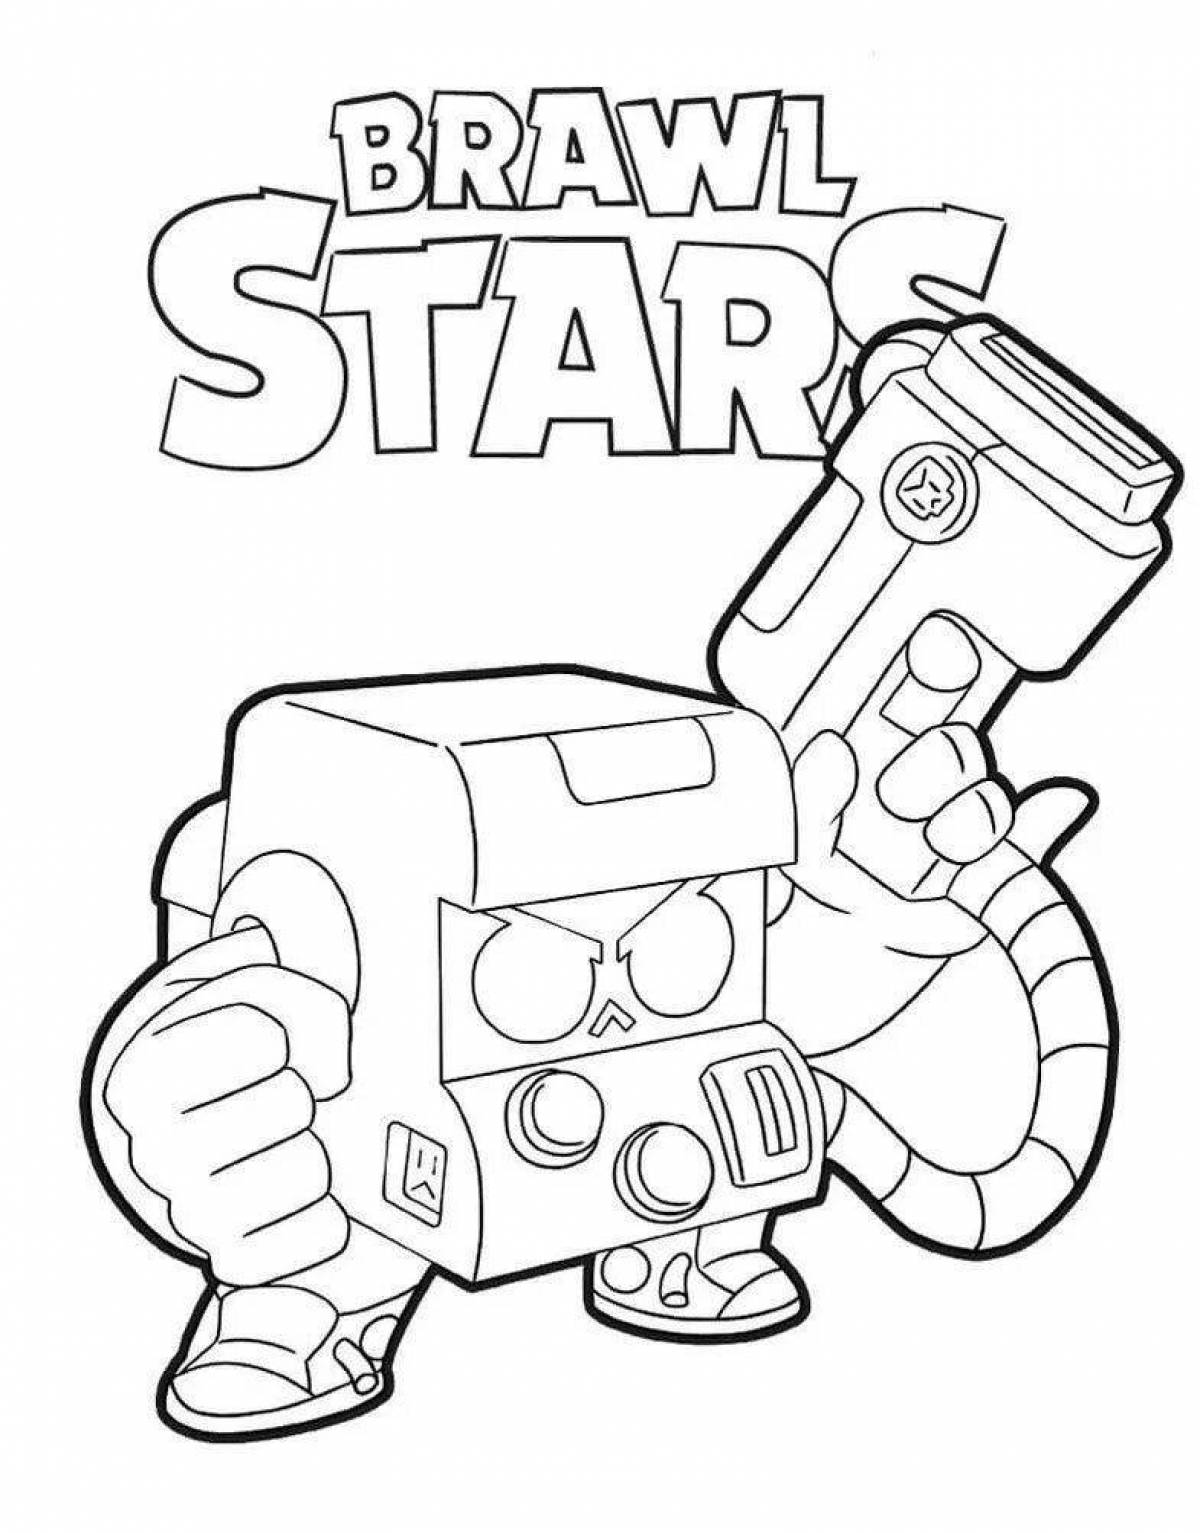 Charming characters bravo stars coloring book